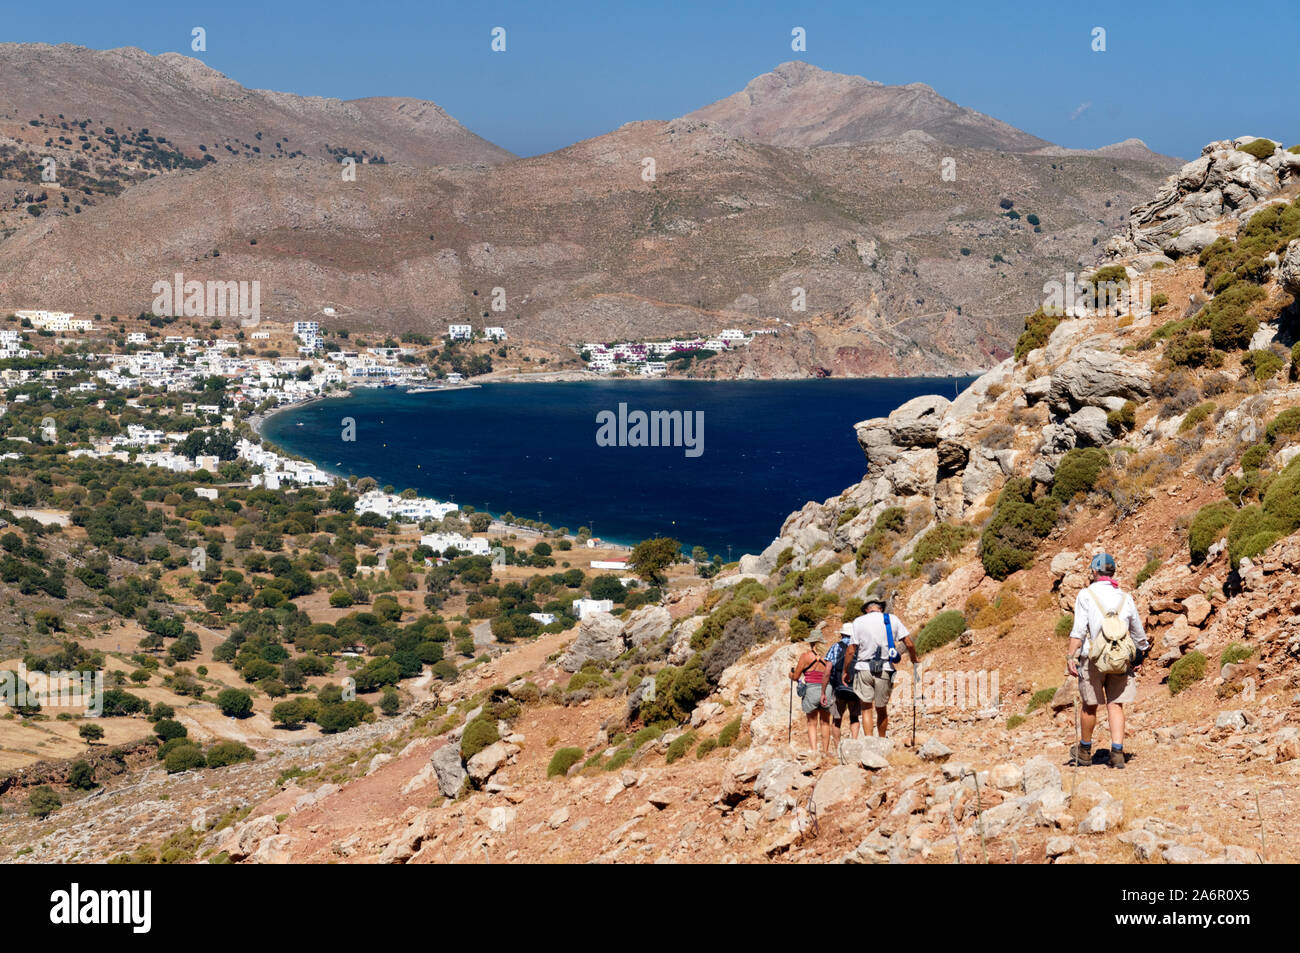 Walkers on path leading towards Livadia from Aghios Pavlos, Tilos, Dodecanese islands, Southern Aegean, Greece. Stock Photo